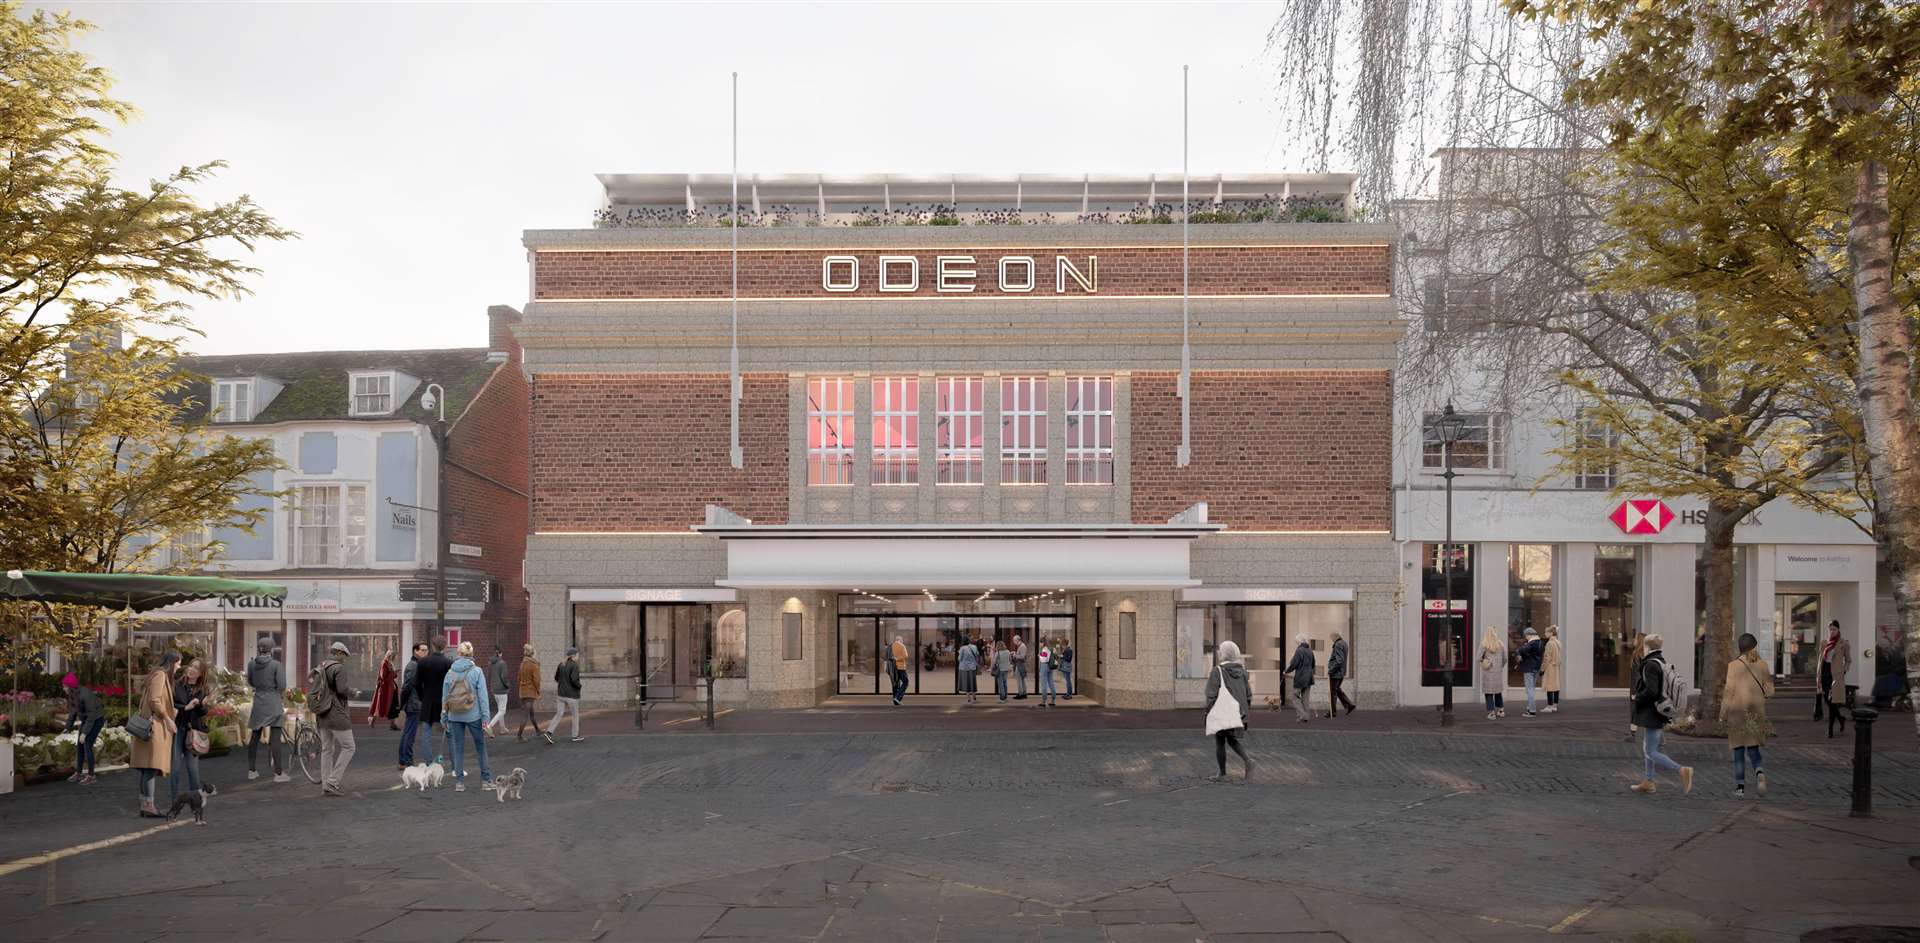 The Odeon name could return to the front of the building. Picture: MICA